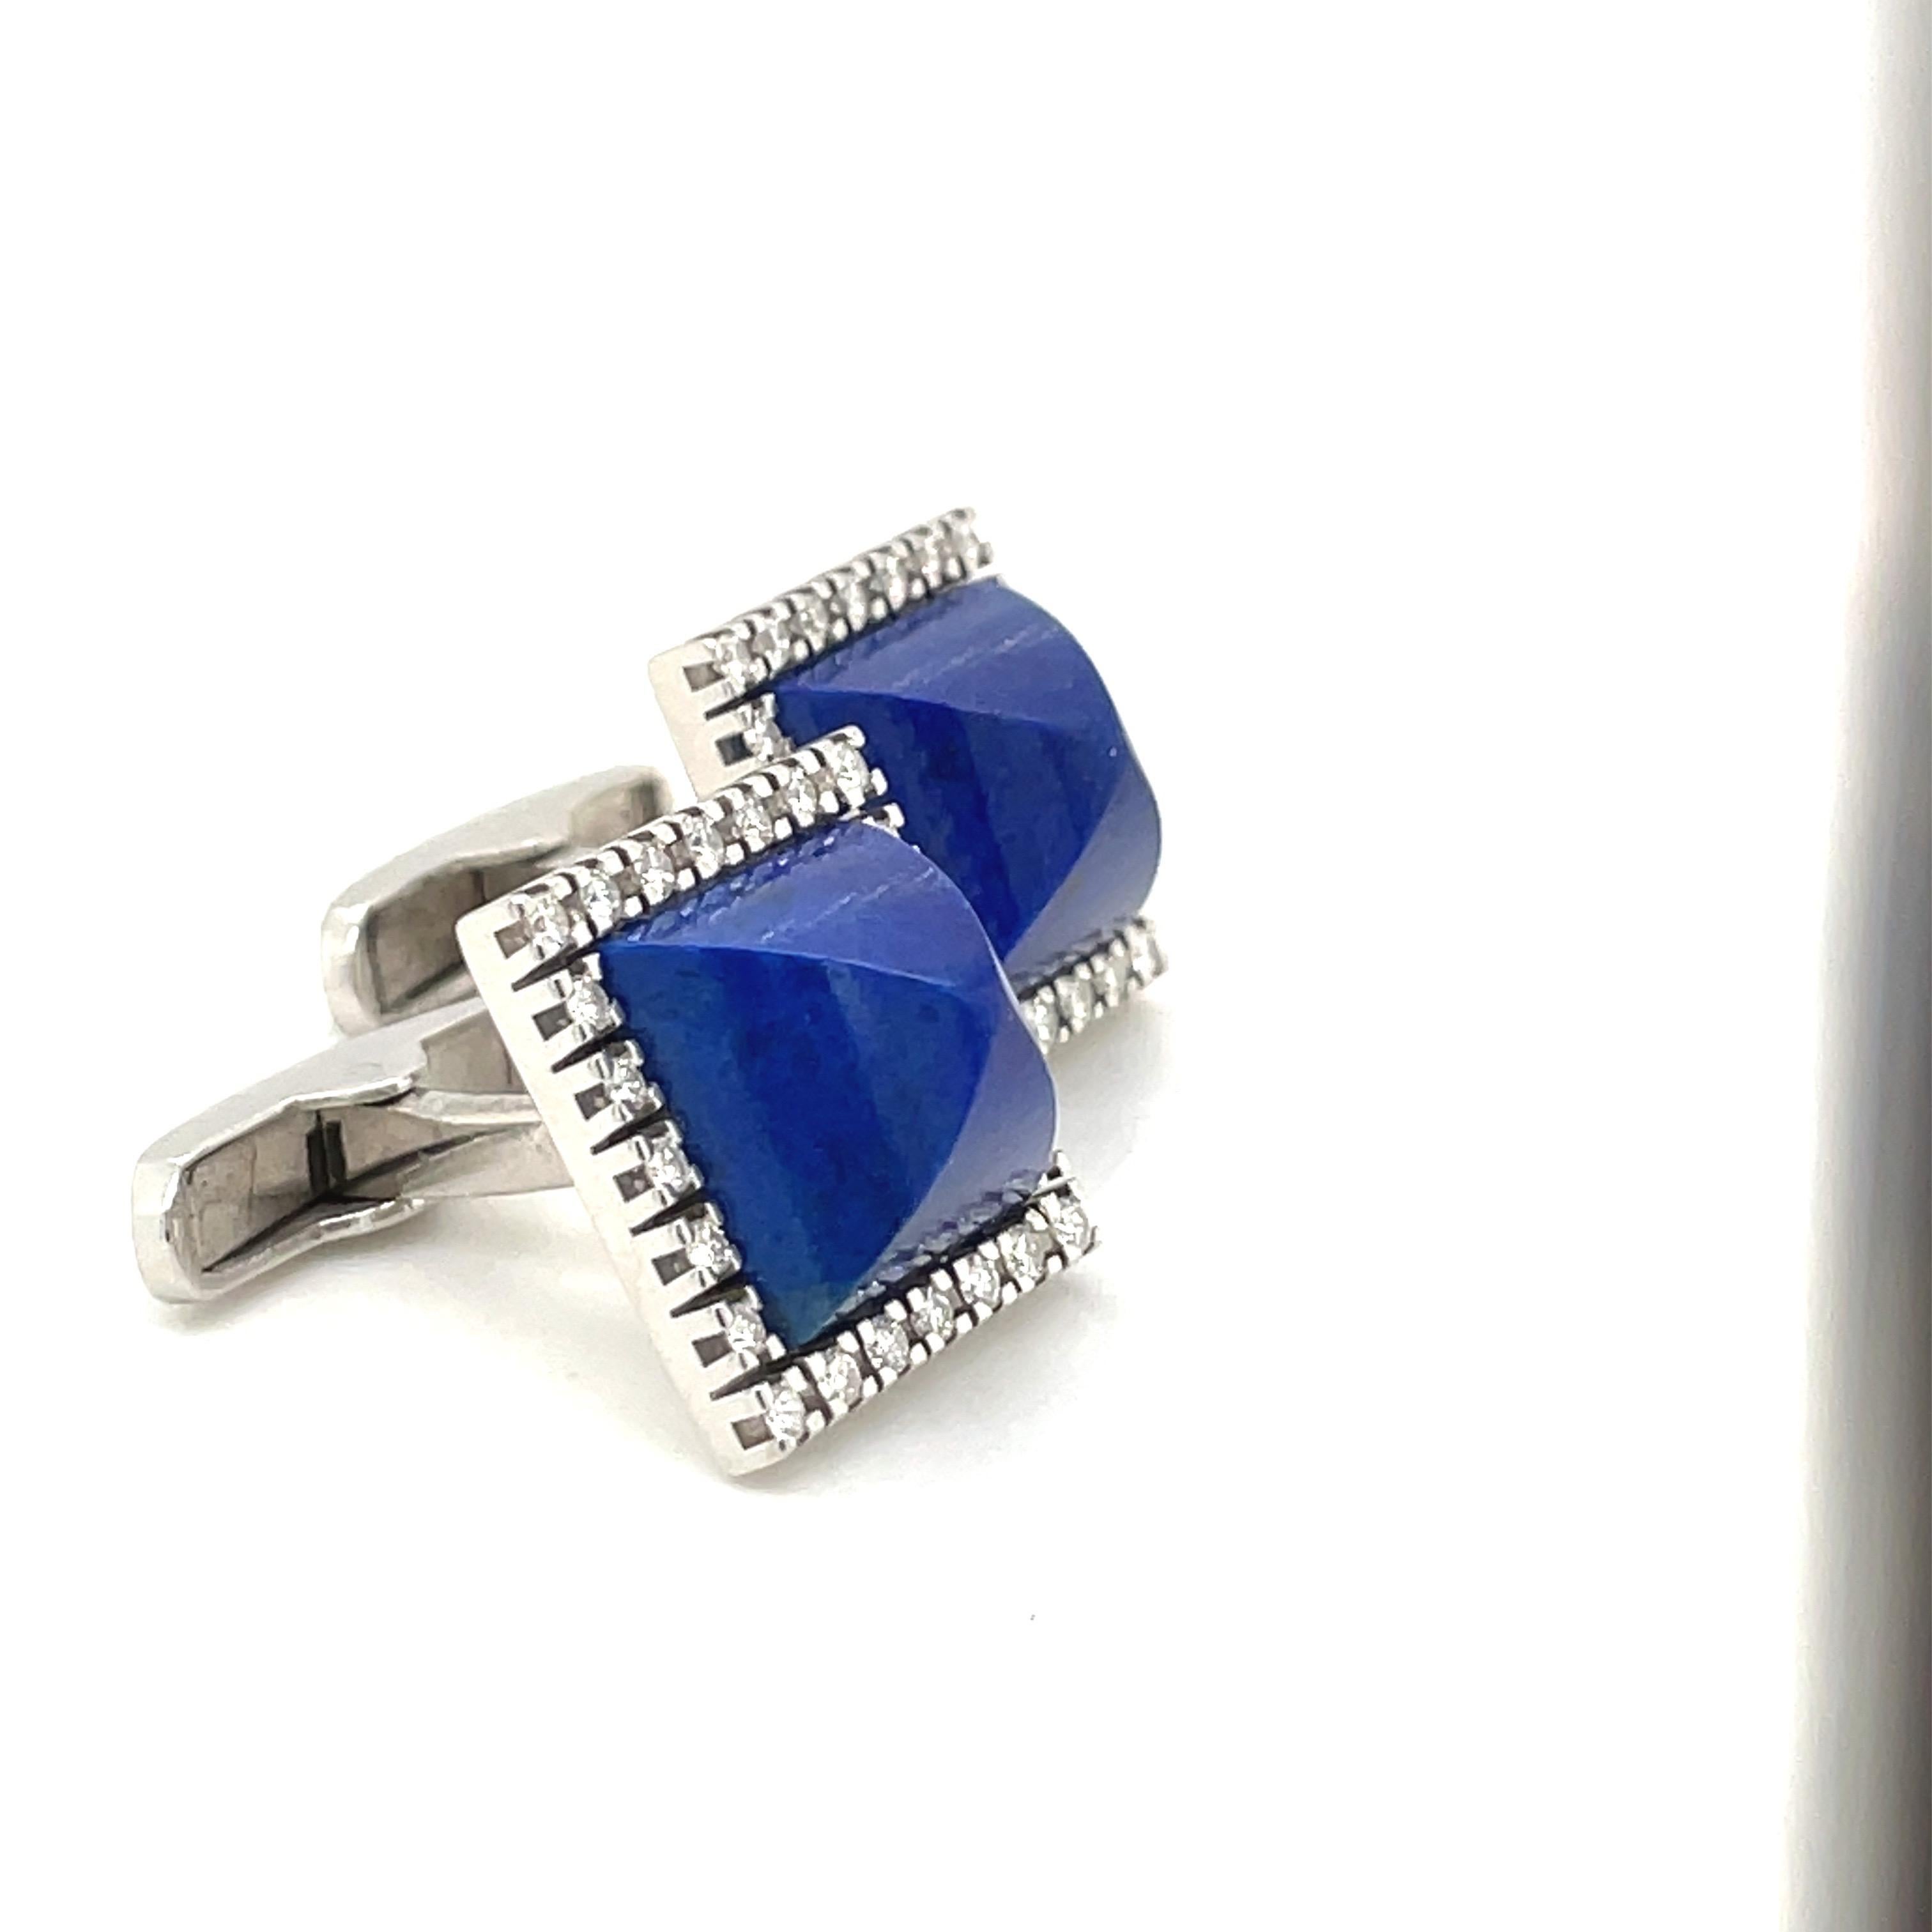 14kt White Gold Diamond 0.96ct & Sugar Loaf Lapis Lazuli Cuff Links In New Condition For Sale In New York, NY